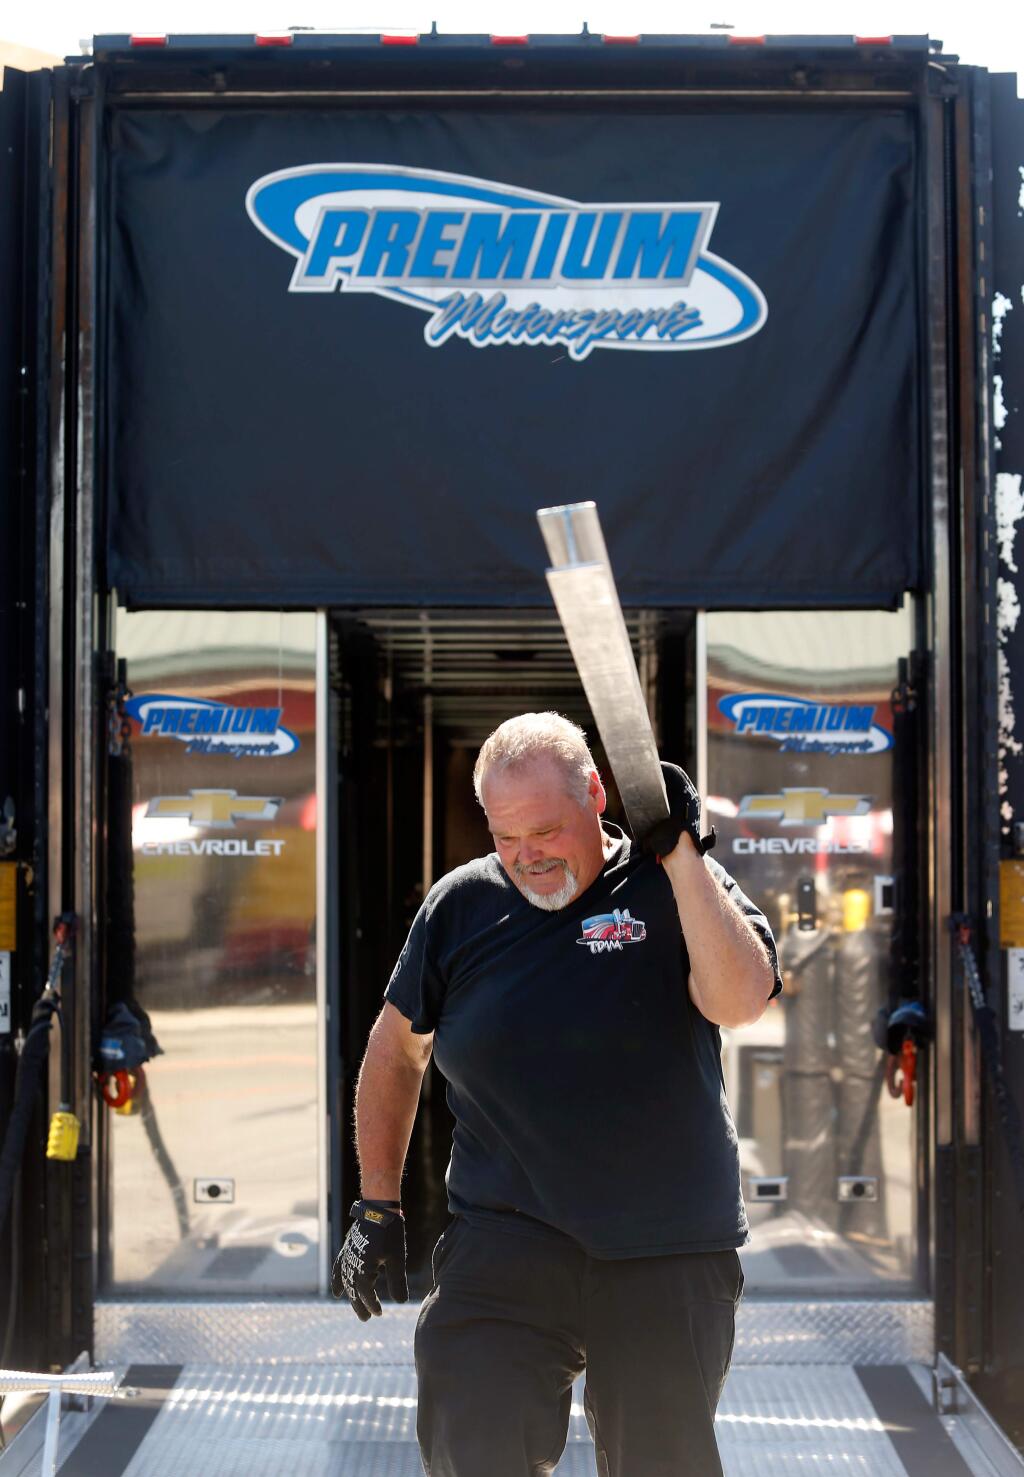 Premium Motorsports crewmember Willy Evernham of Mooresville, NC unloads equipment from the transporter in preparation for this weekend's NASCAR Monster Energy Cup Series Toyota/Save Mart 350 race at Sonoma Raceway, in Sonoma, California, on Thursday, June 21, 2018. (Alvin Jornada / The Press Democrat)